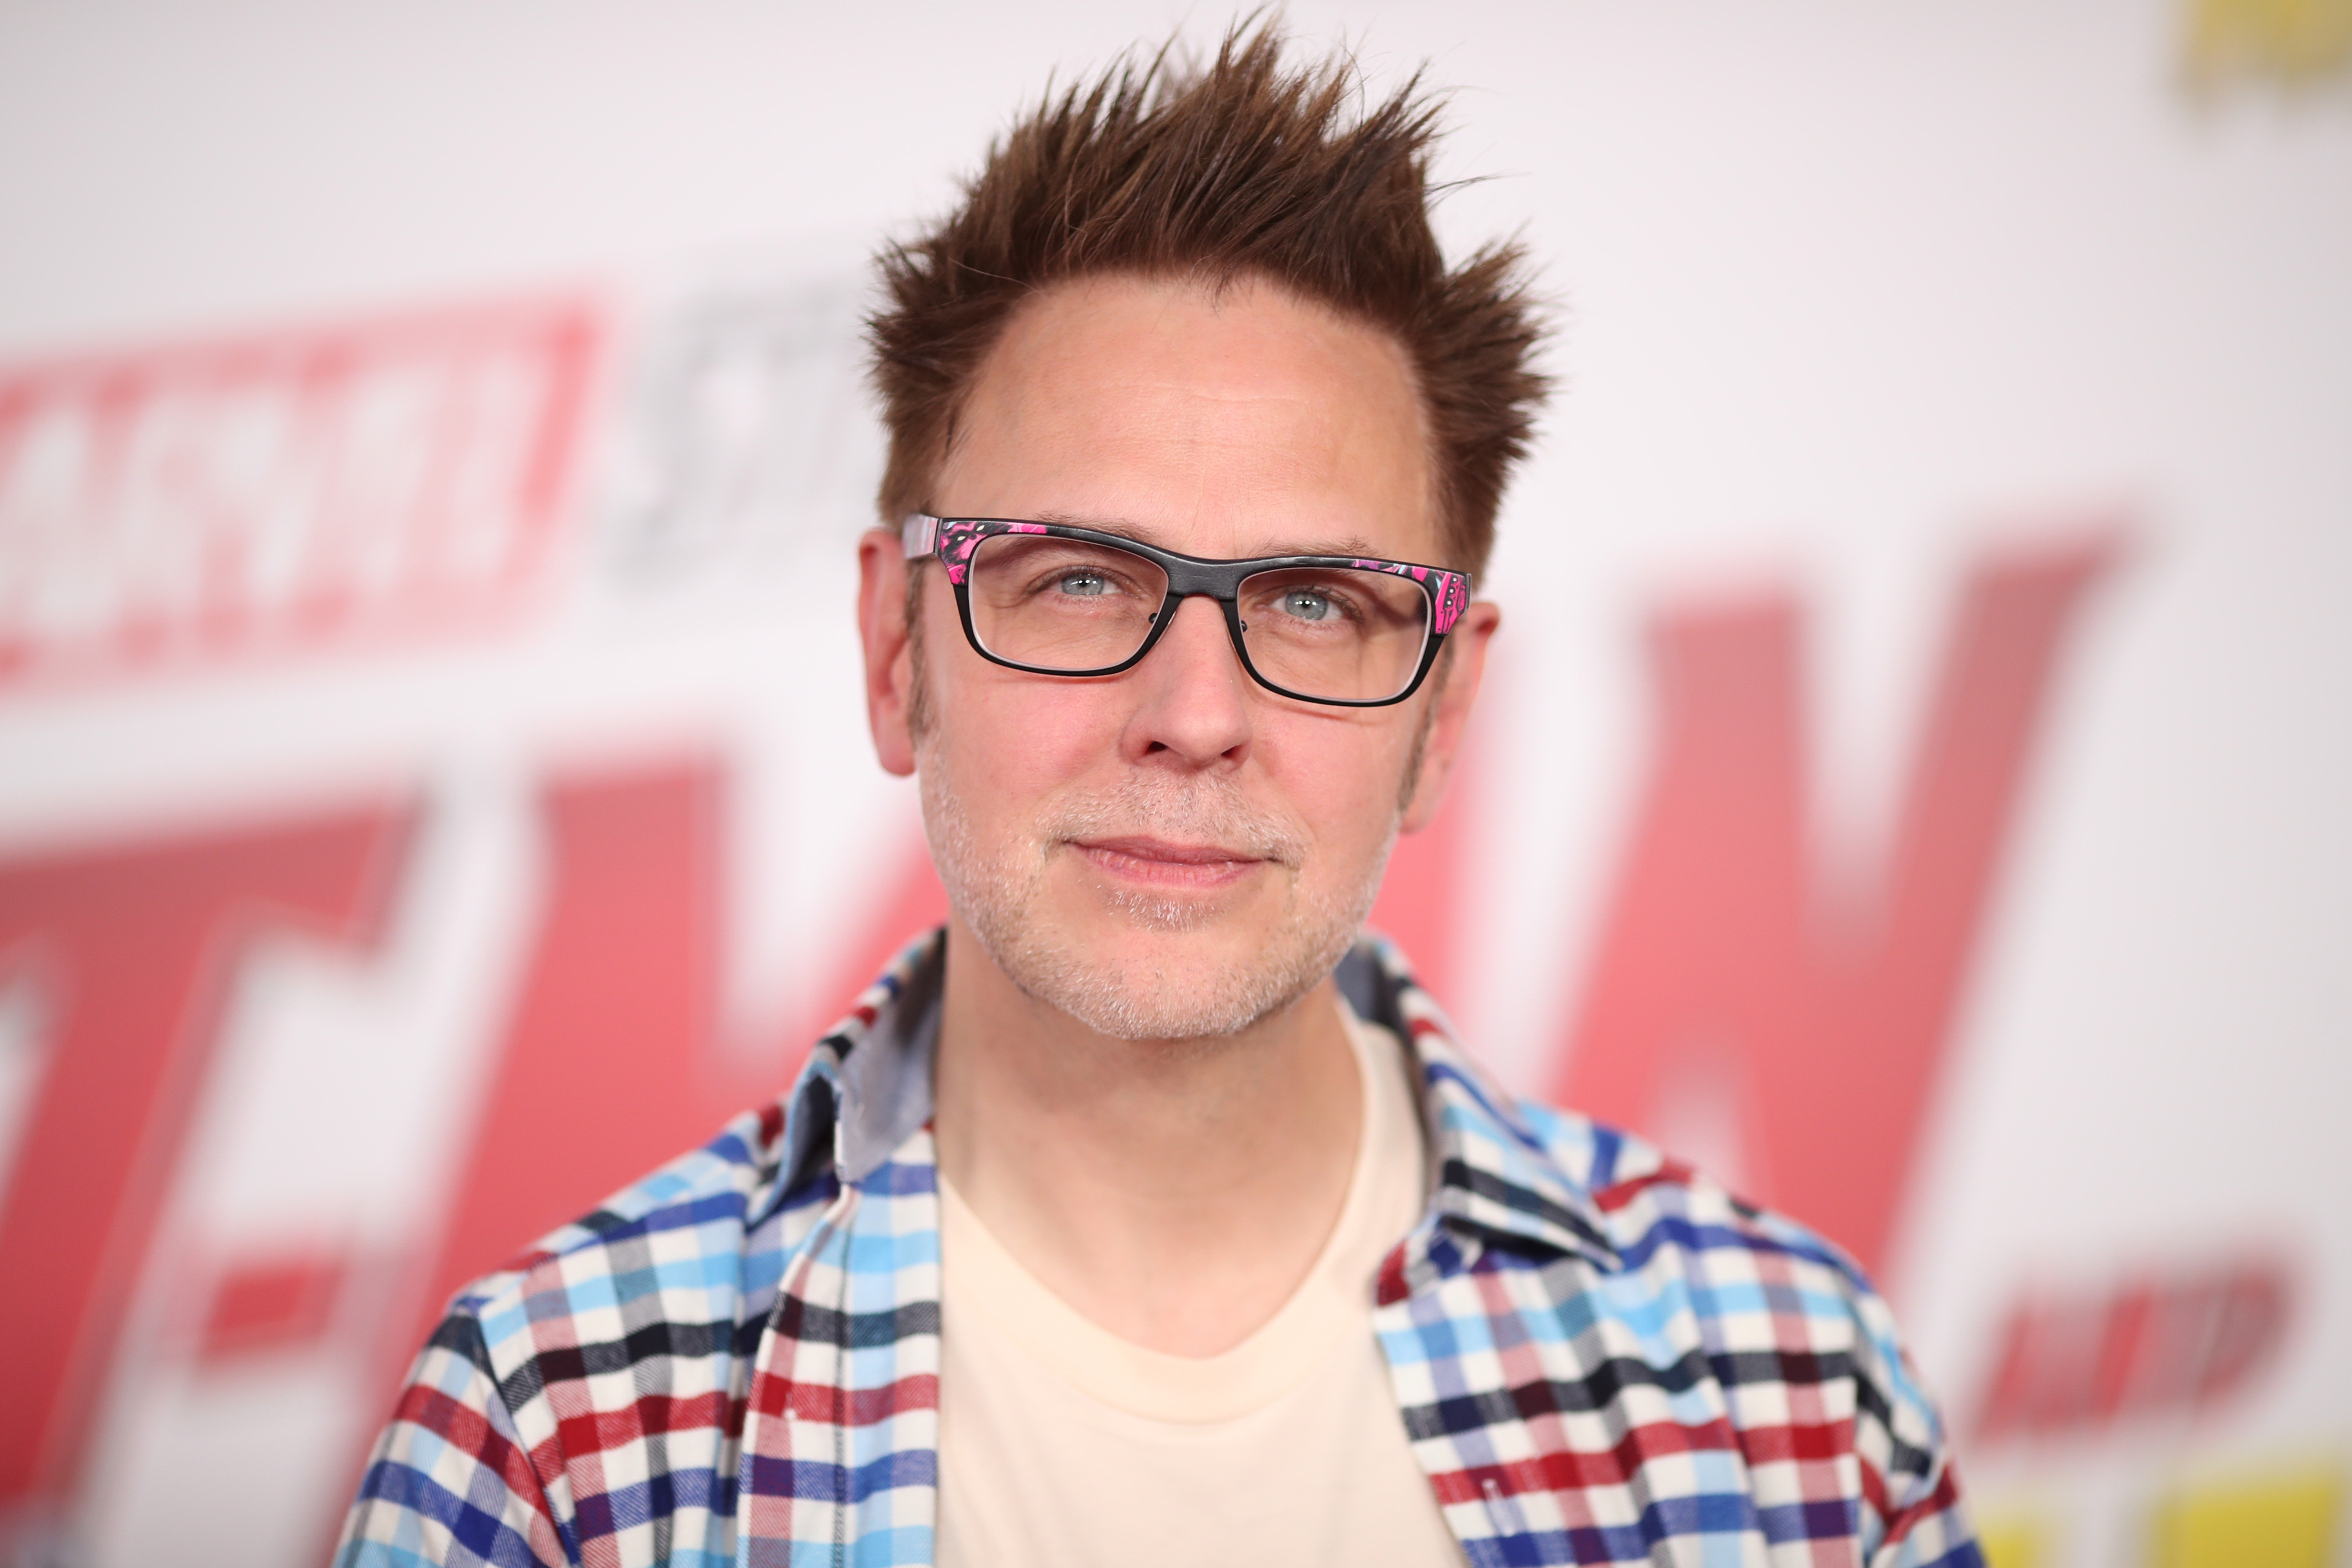 'Guardians of the Galaxy' director James Gunn wears a blue, white, and red checkered shirt at 'Ant-Man and the Wasp' premiere